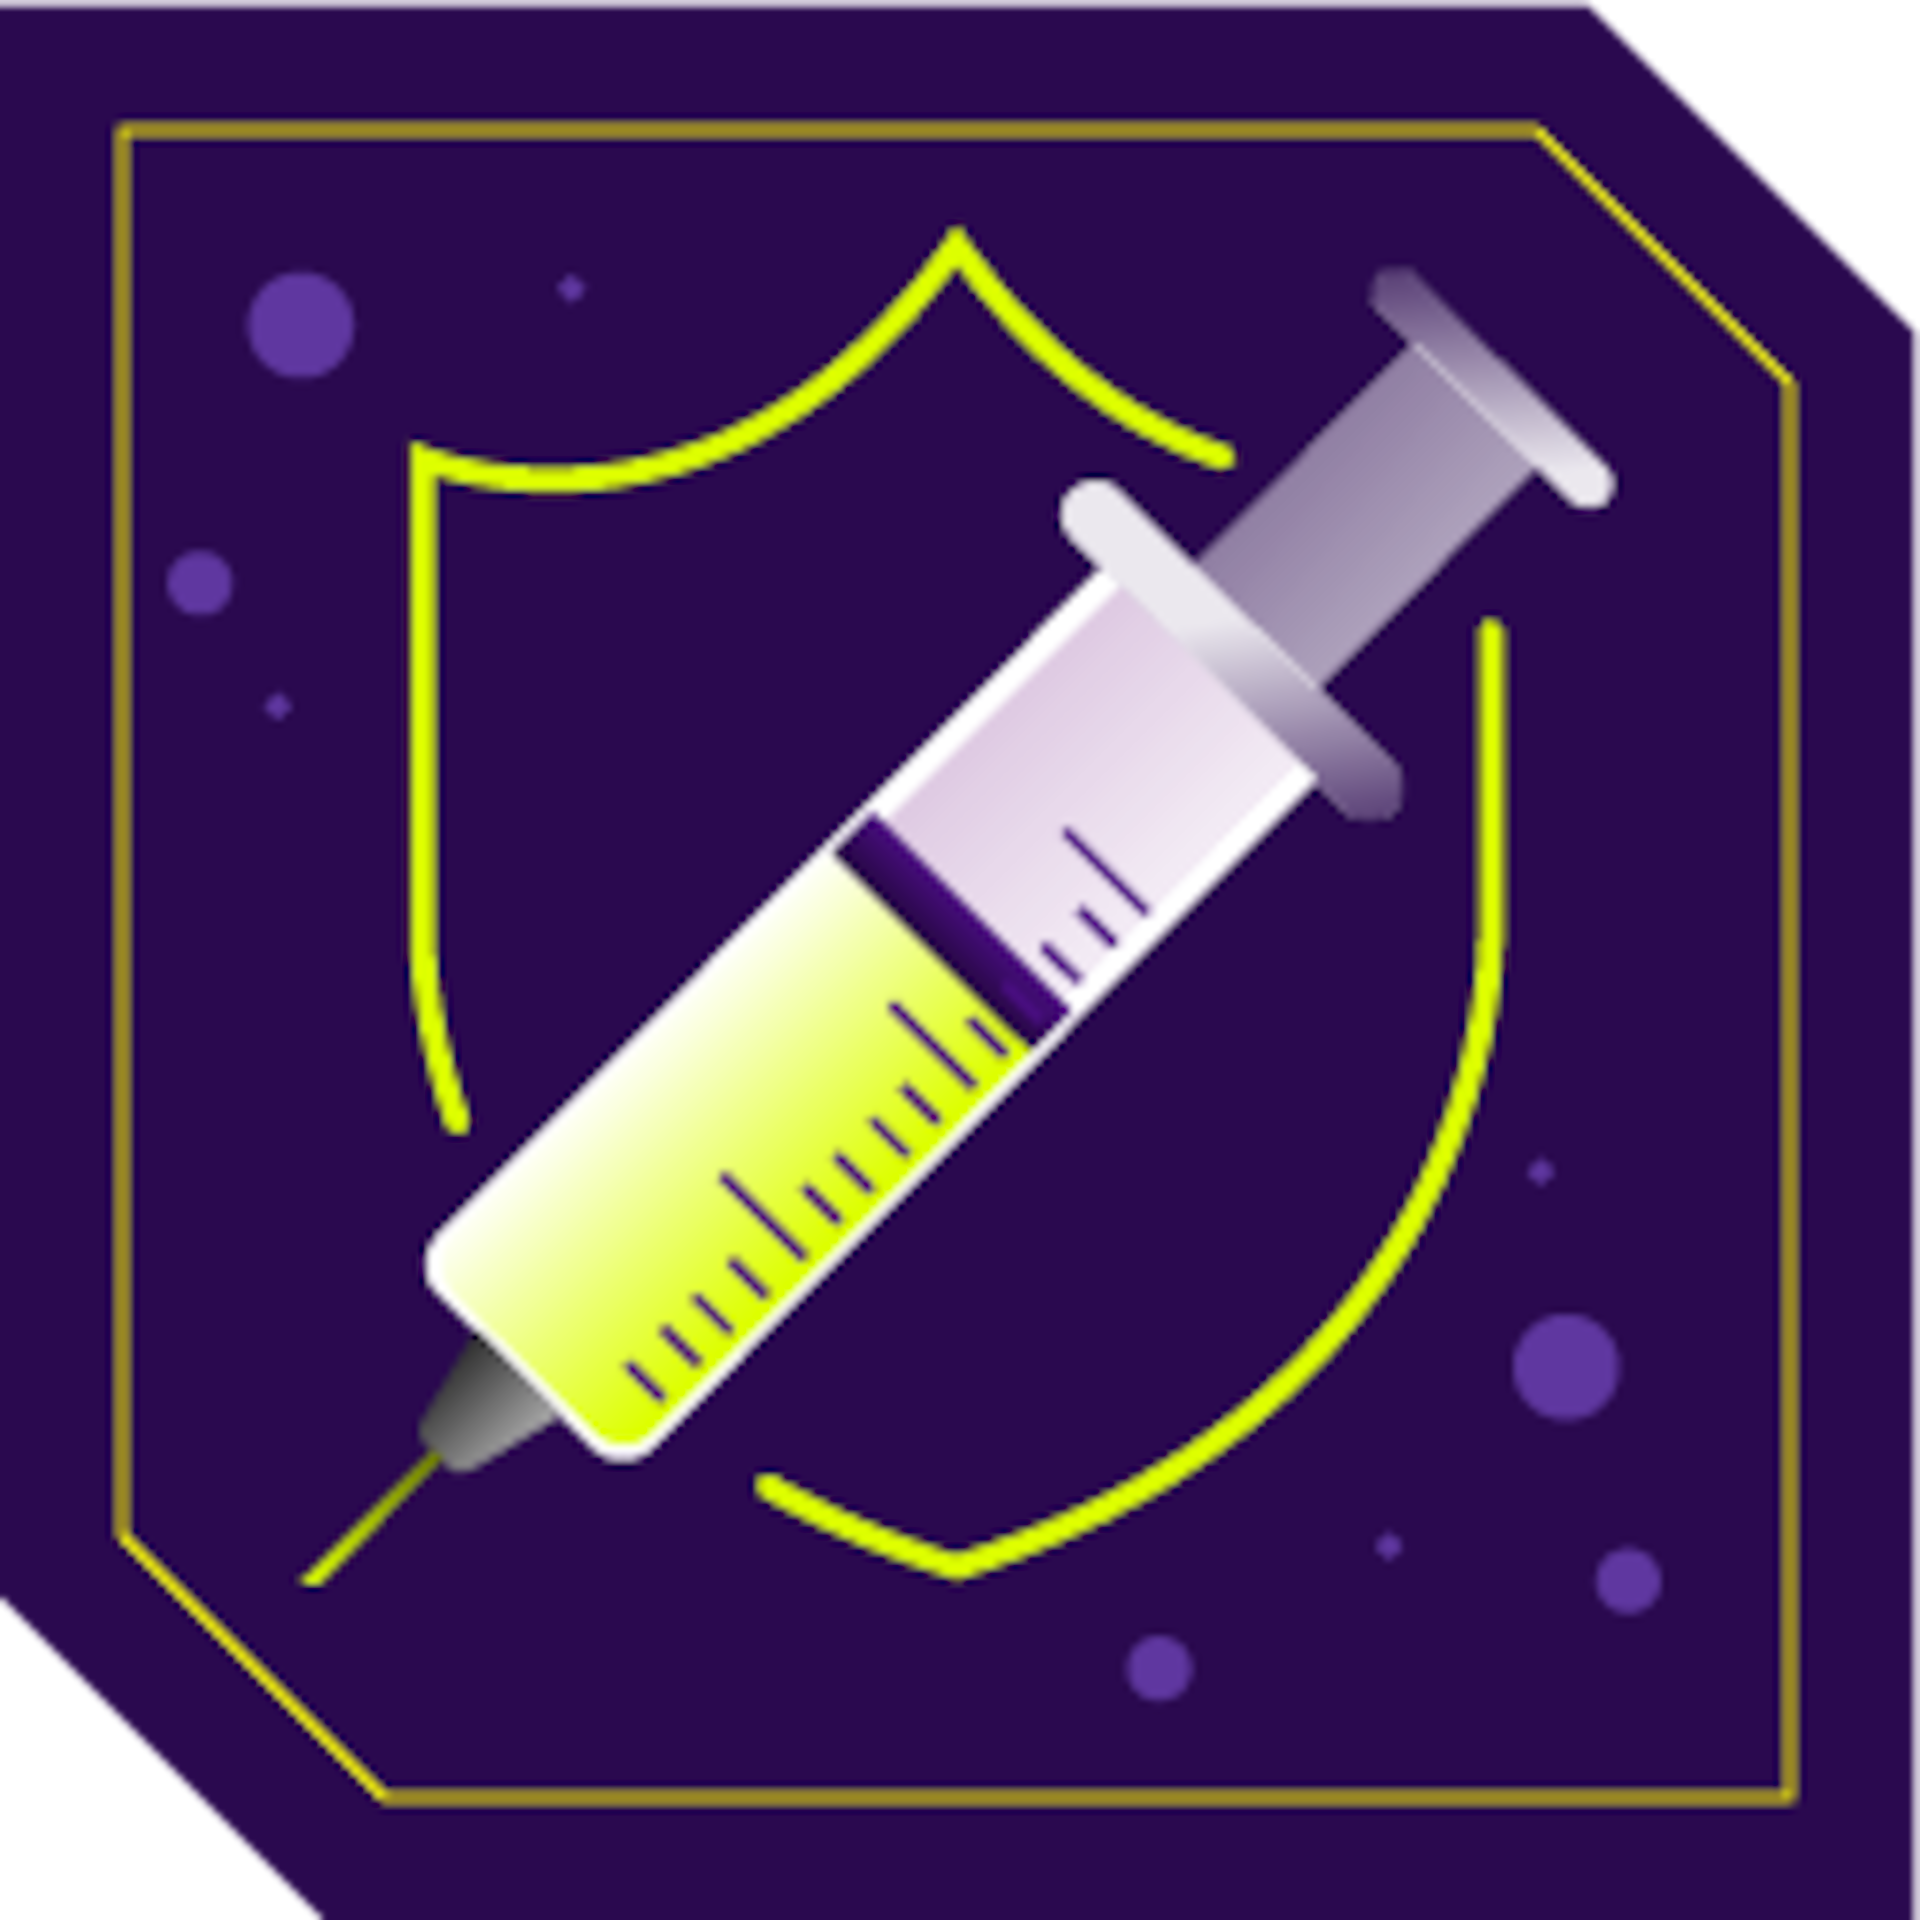 Syringe with a shield in the background, surrounded by viruses